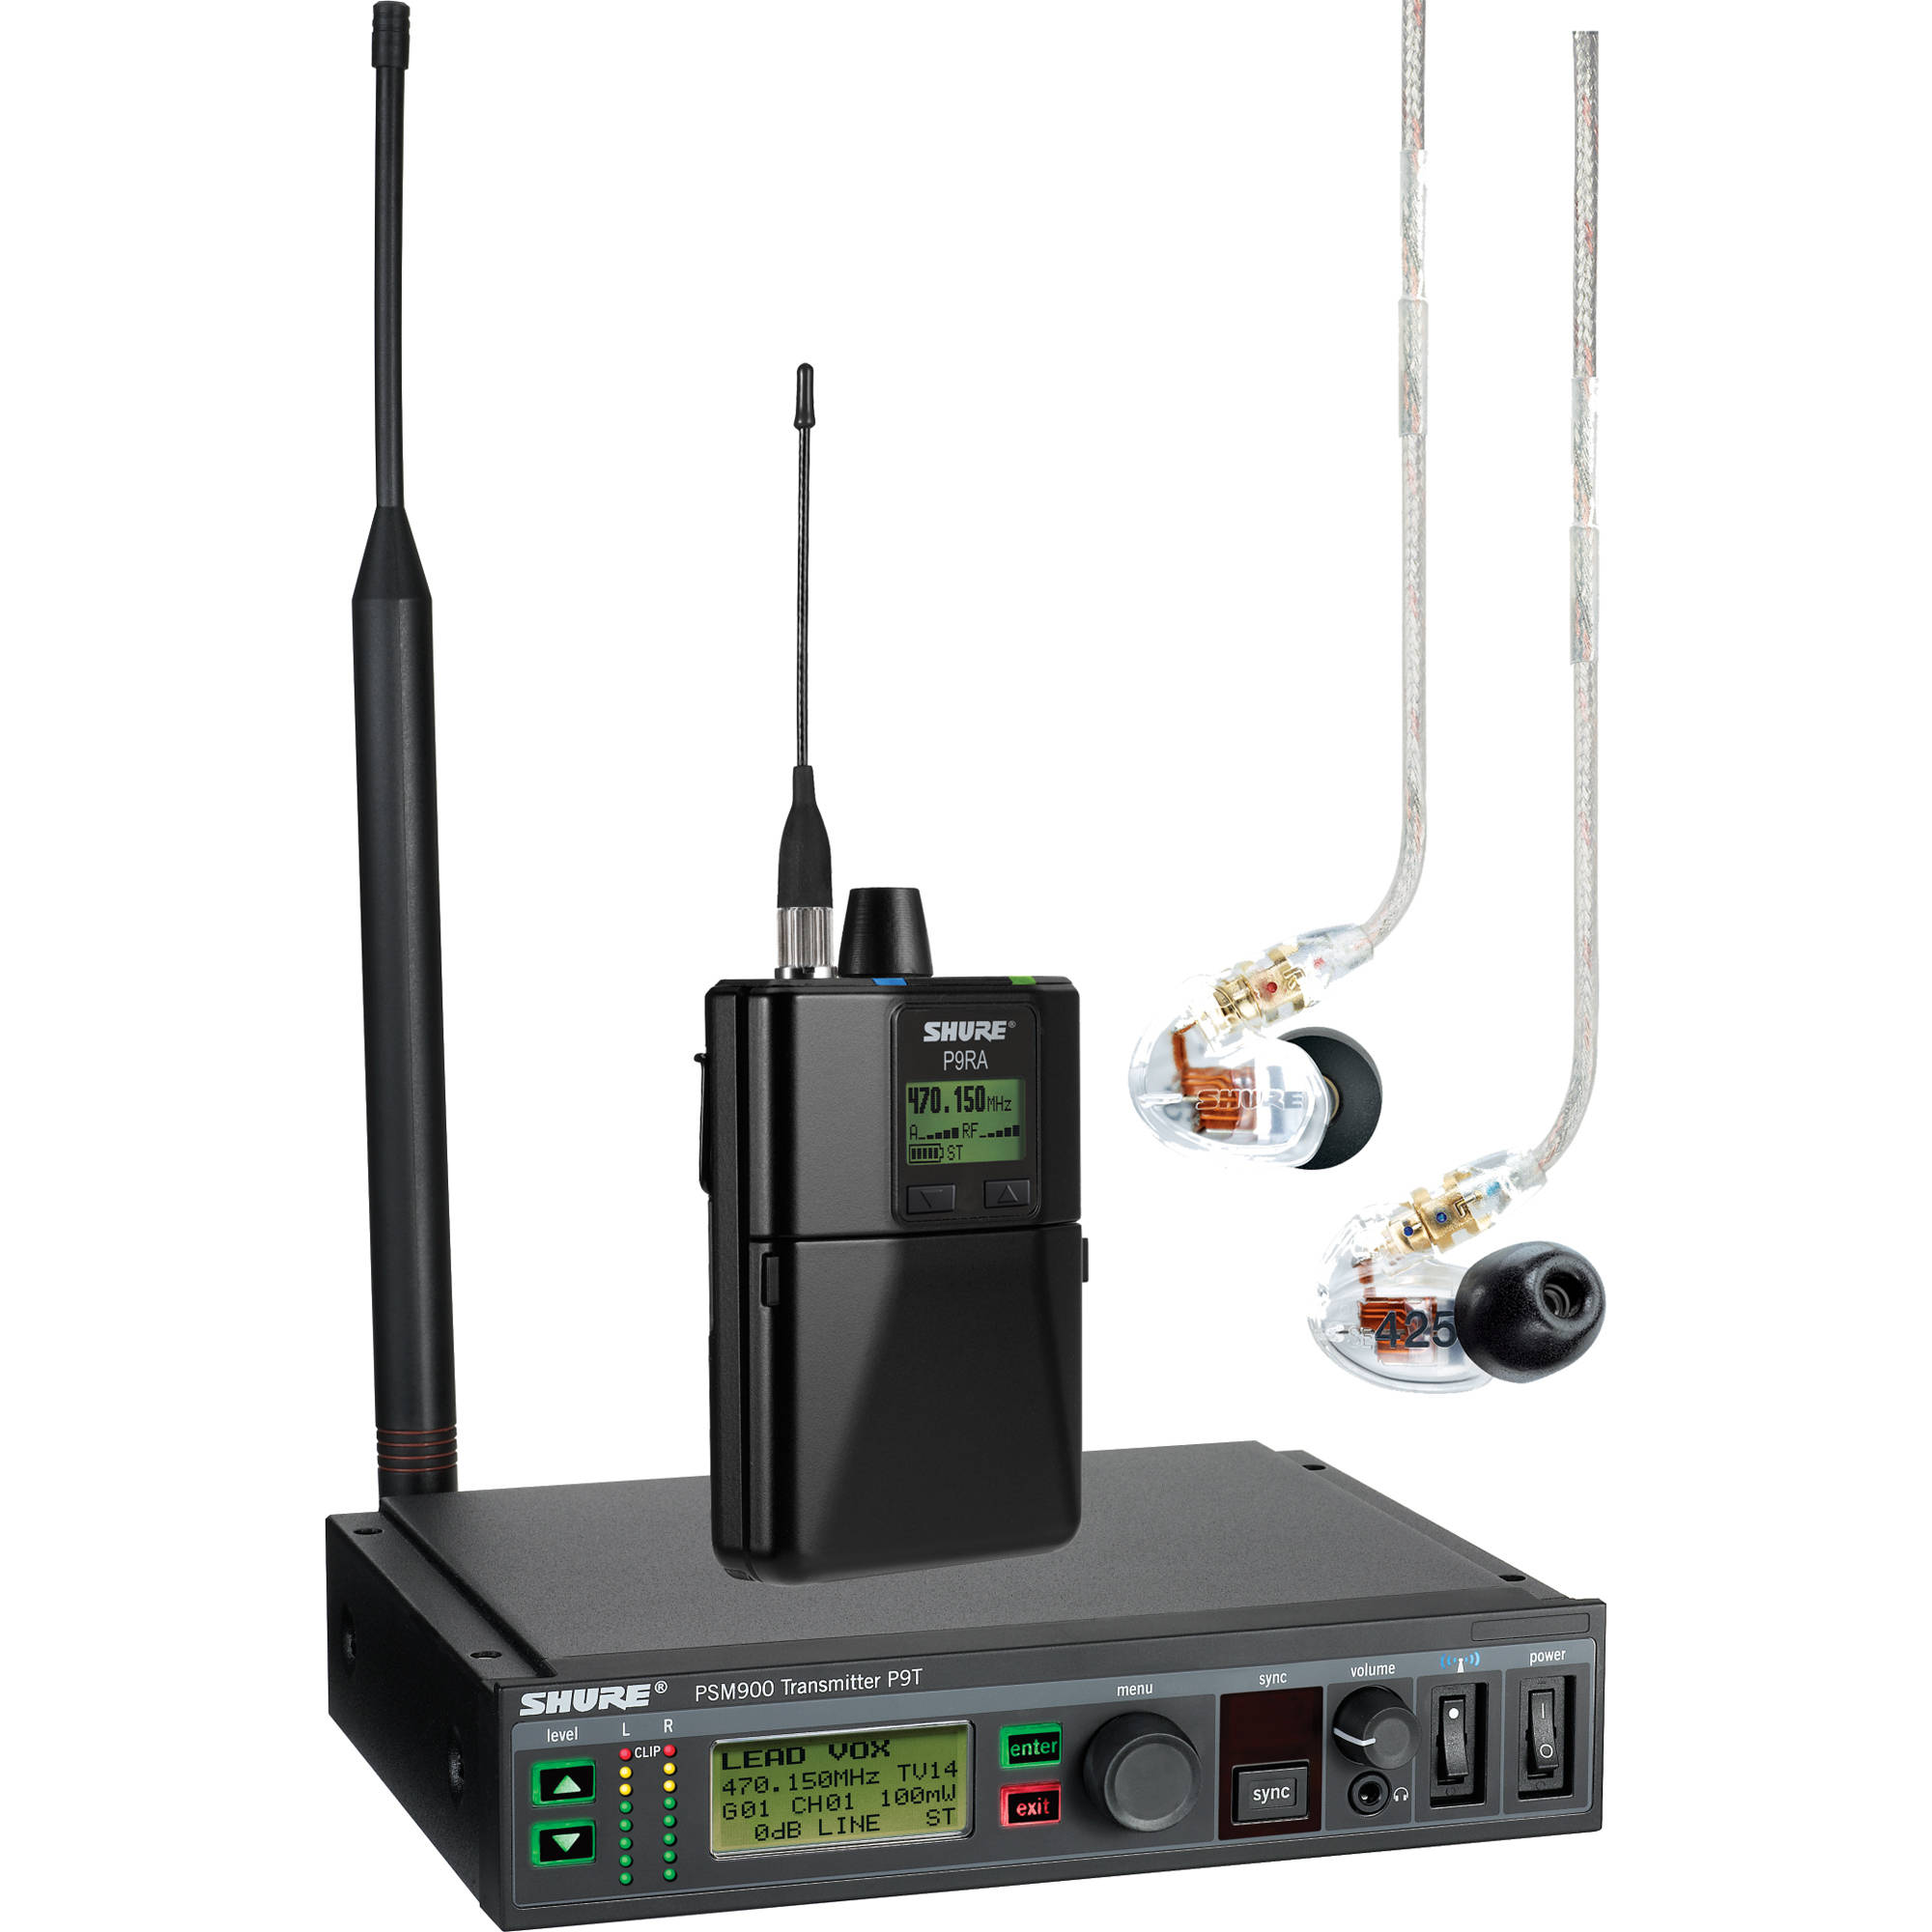 Shure PSM900 (P9TRA+425CL G6) | Wireless In-Ear Monitoring System w/ SE425-CL Earphones